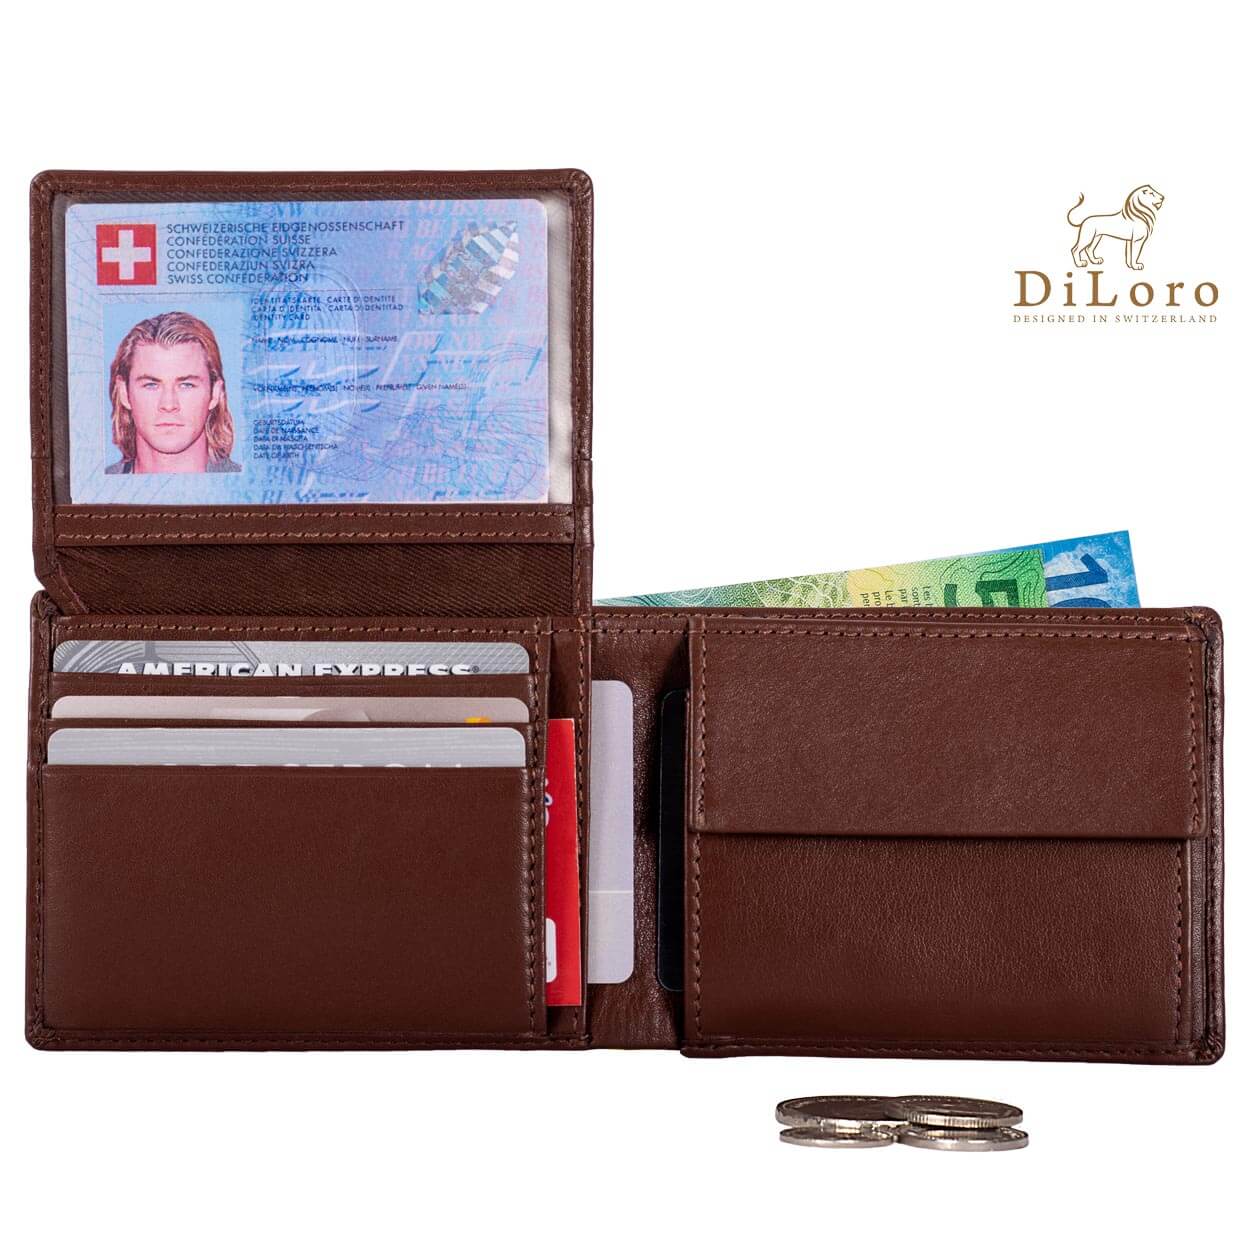 Compact Mens Leather Wallet with Coin Compartment in Hickory Brown - Inside View, Flip-ID Open (with currency - not included)